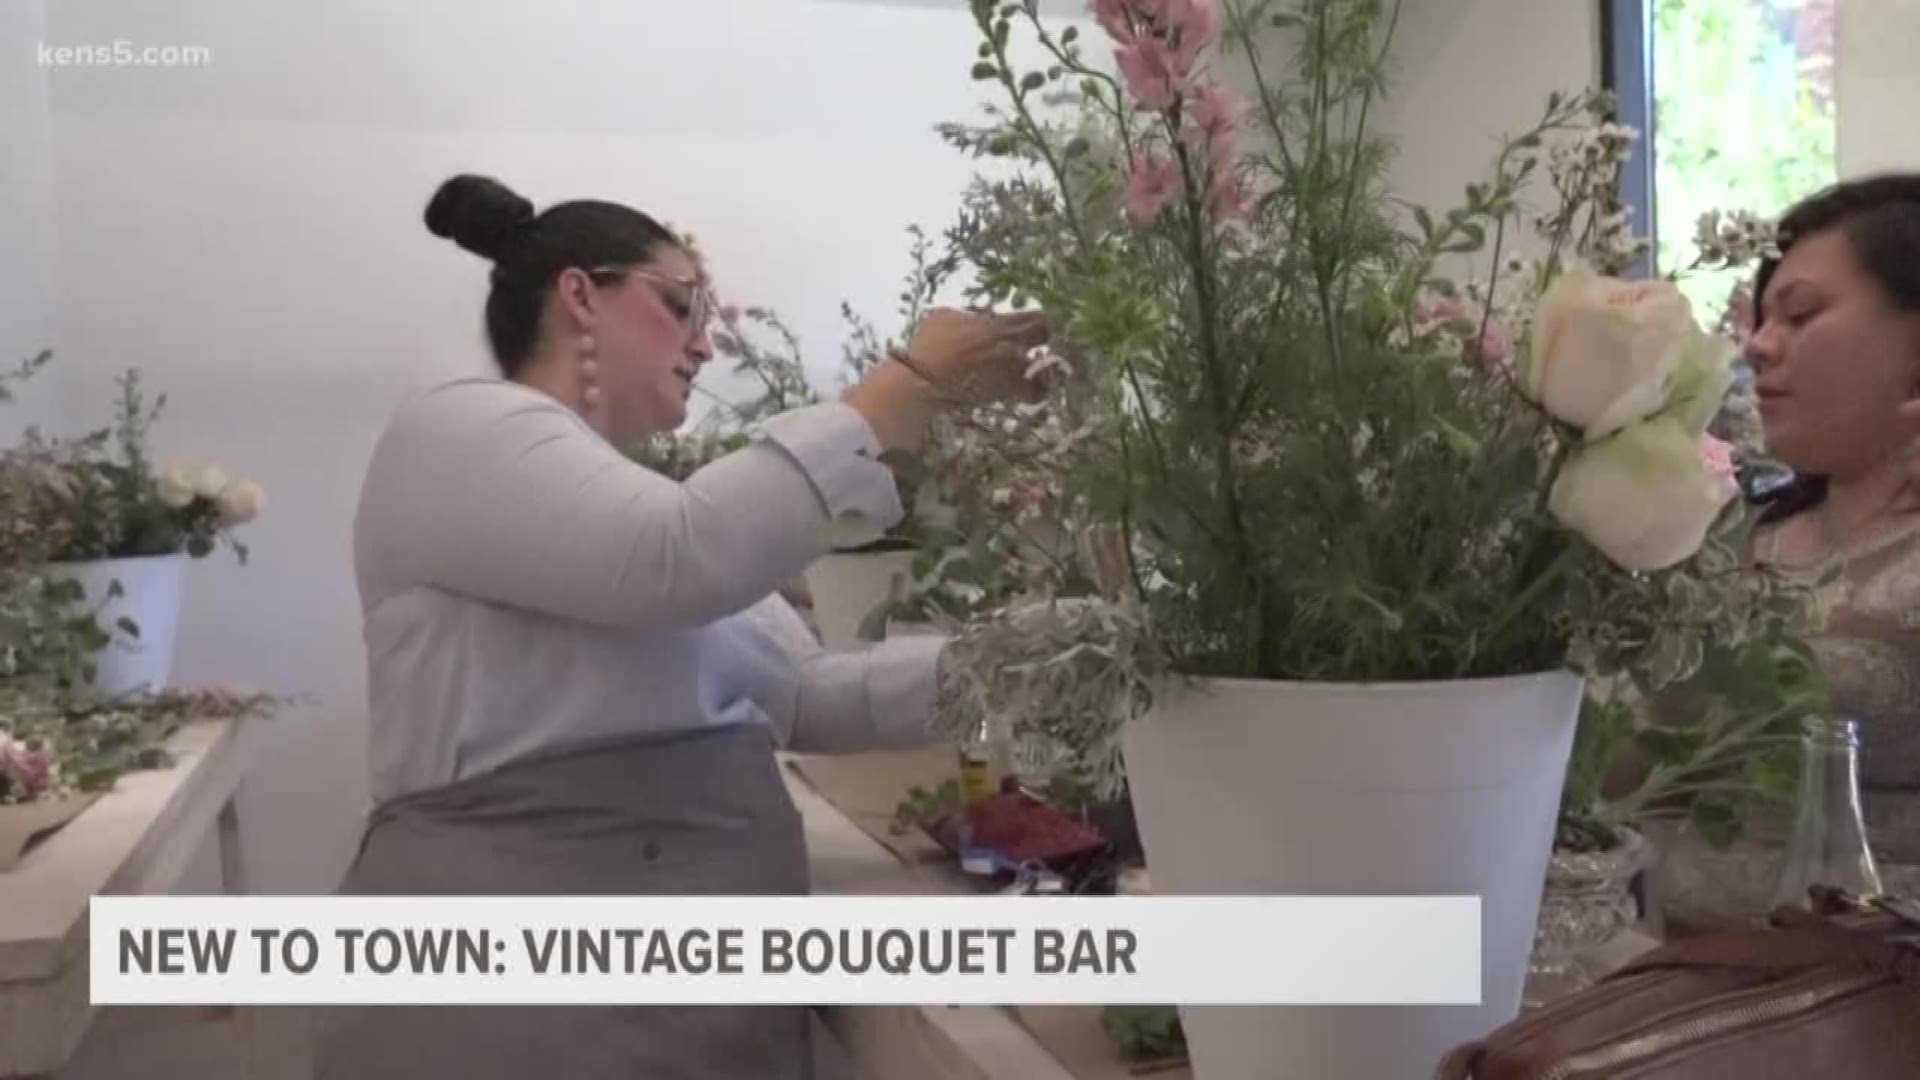 A flower shop in the Pearl Brewery allows you to build your own bouquet of flowers and plants.